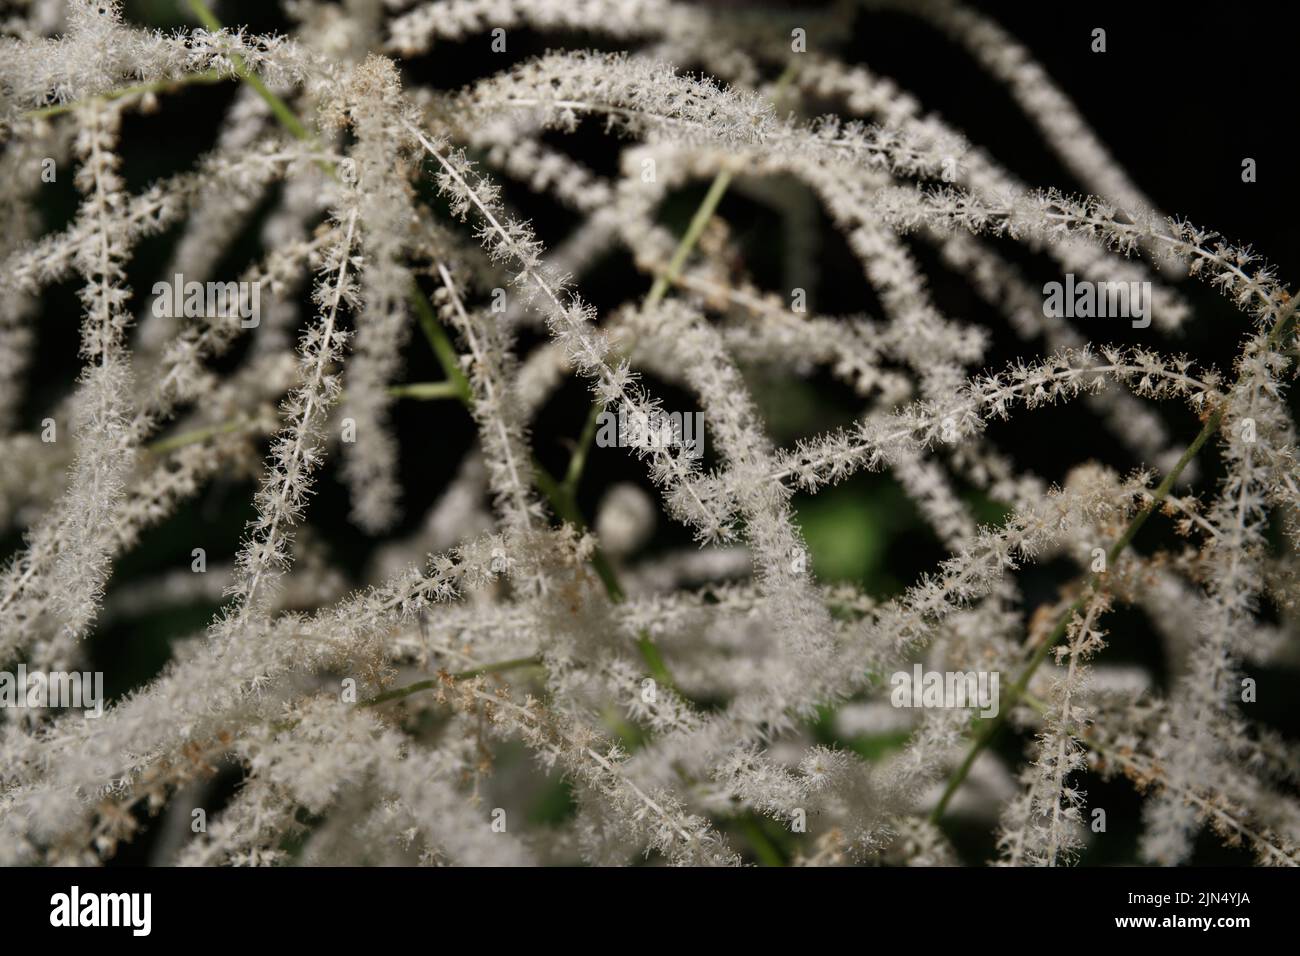 Aruncus dioicus, known as goat's beard, buck's-beard or bride's feathers, a flowering herbaceous perennial plant. close-up, selective focus Stock Photo